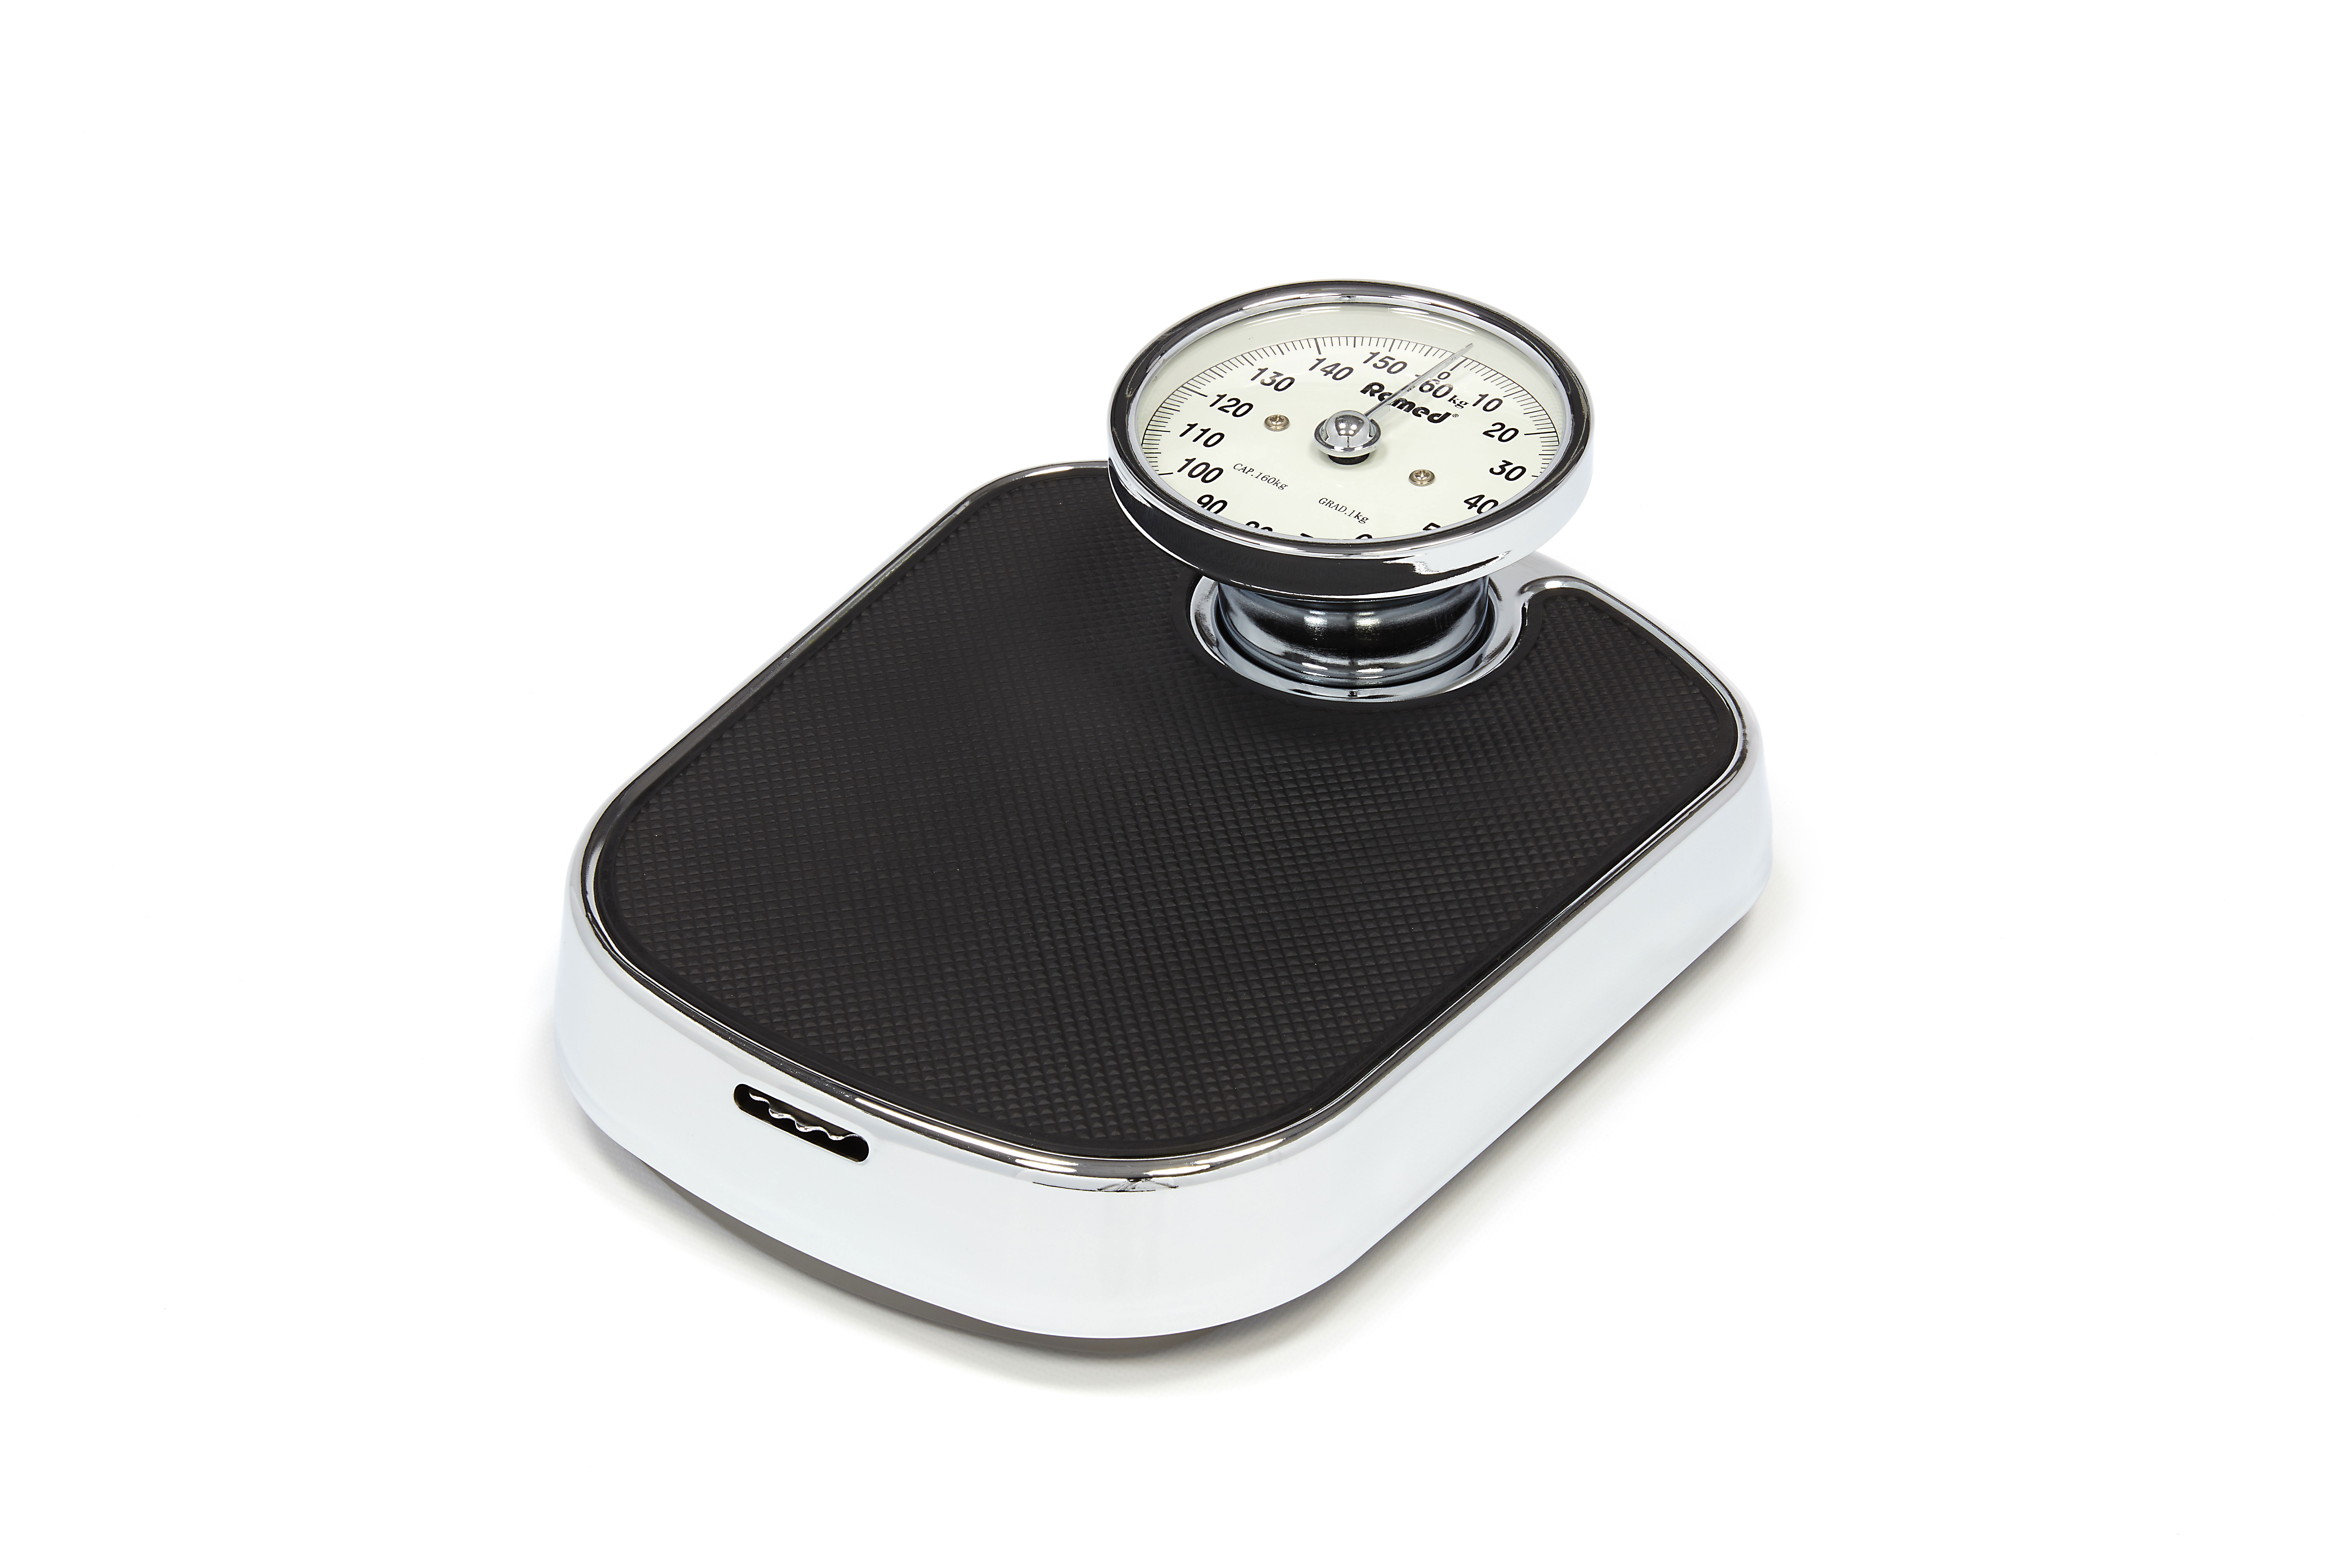 PS-002 Romed personal scales, mechanical type, black, packed per piece in an inner box, 4 pcs in a carton.